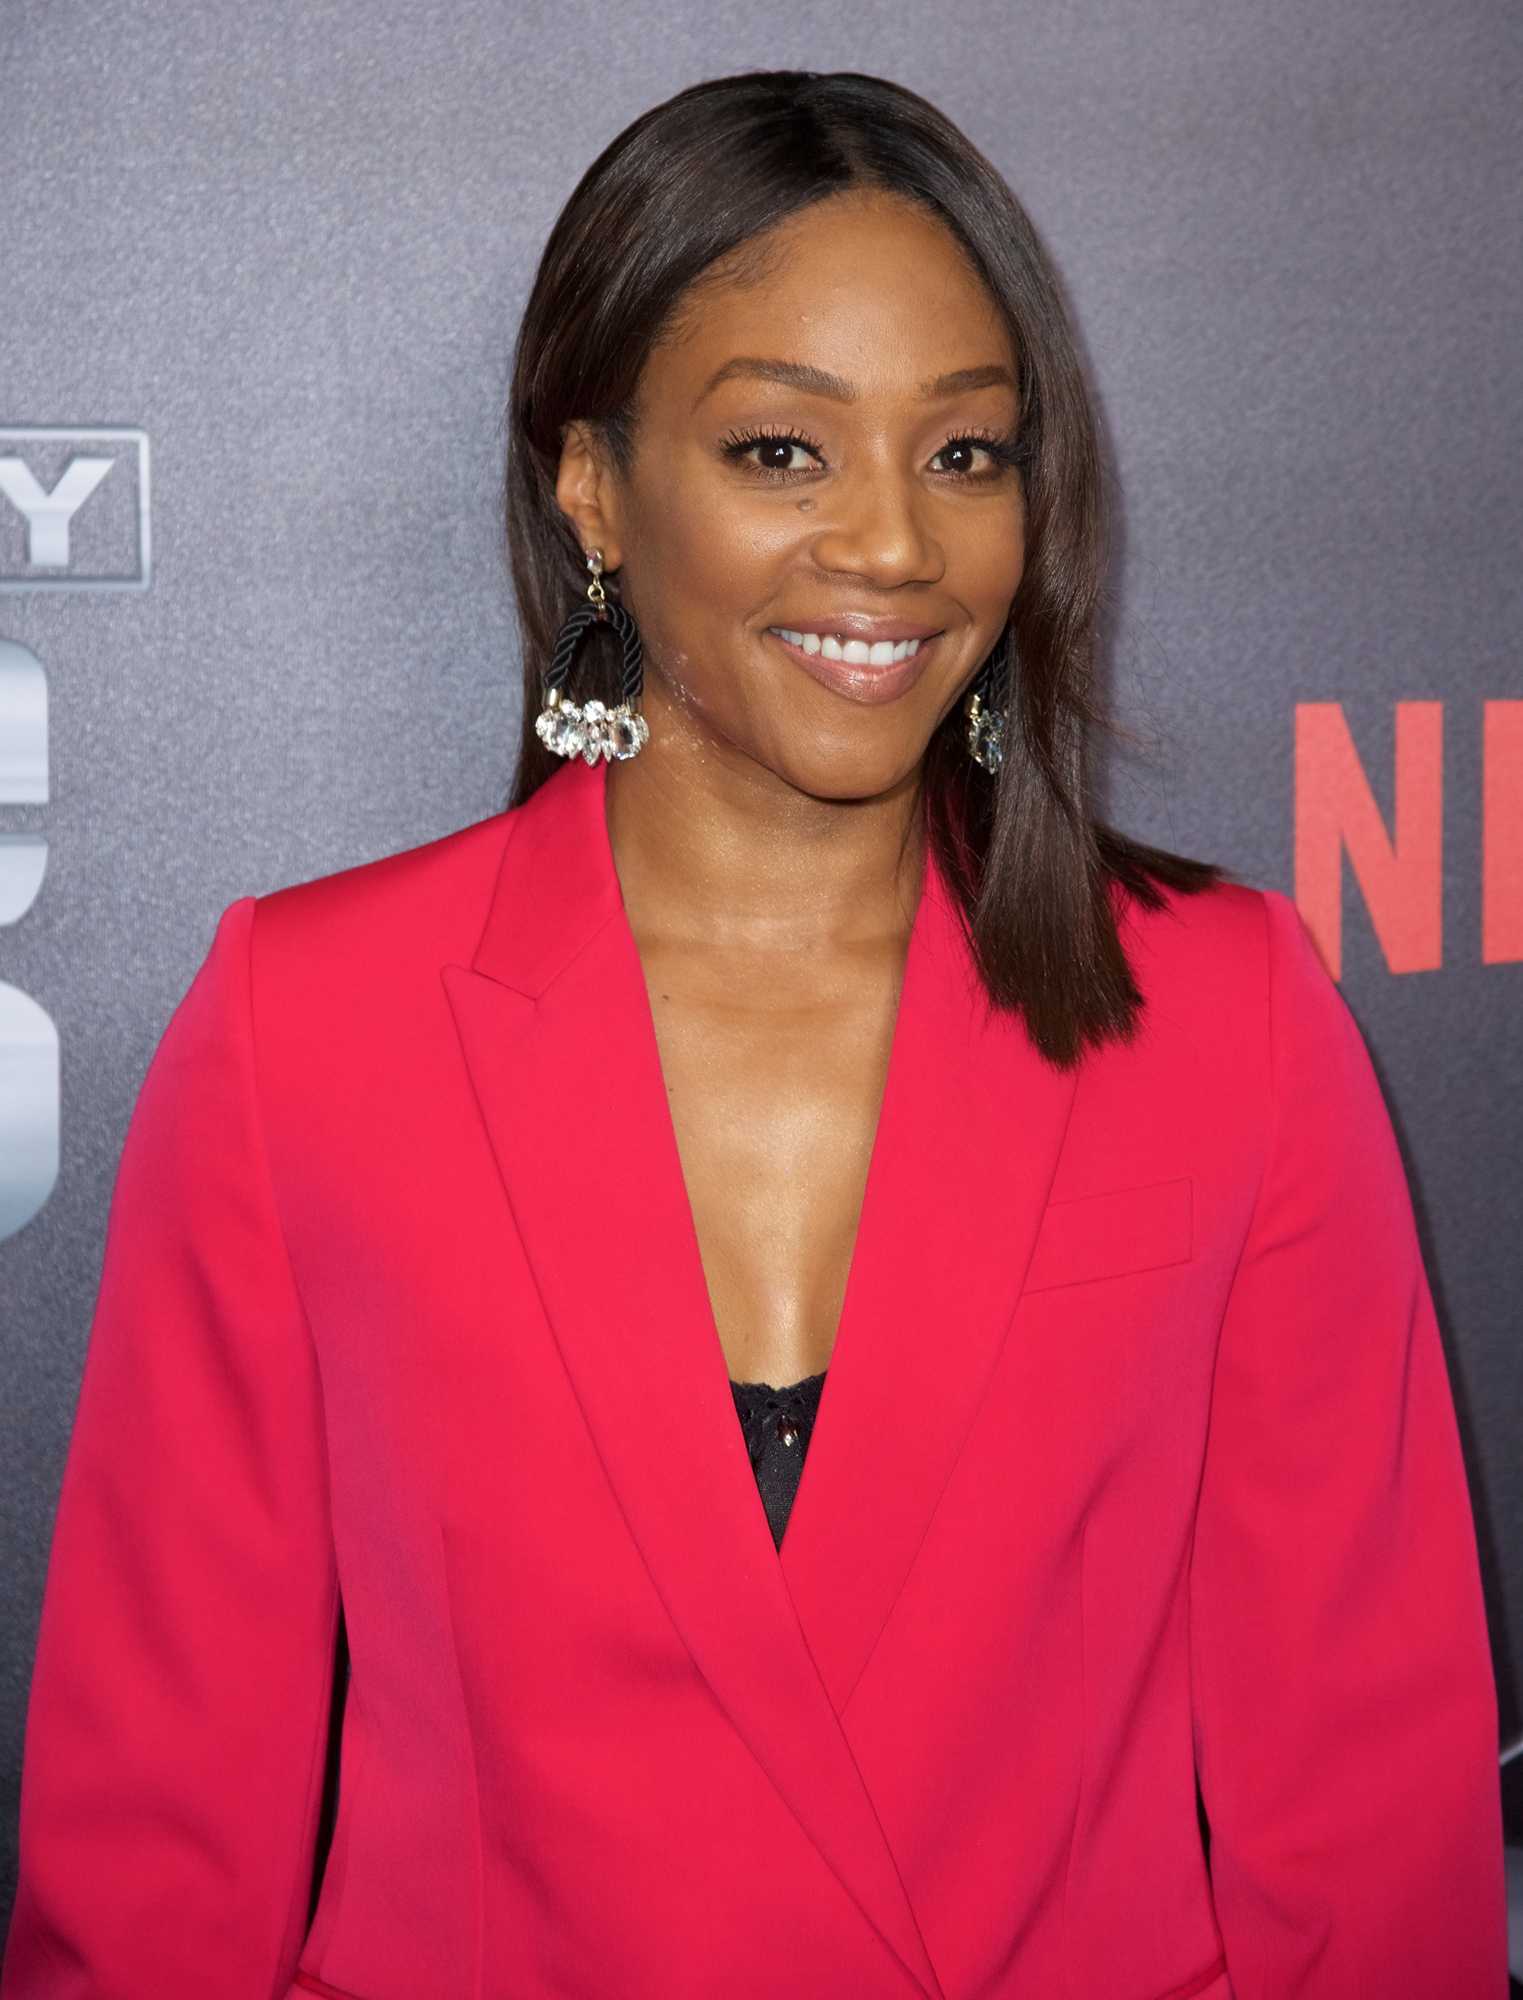 70+ Hot And Sexy Pictures Of Tiffany Haddish Are Just Too Hot To Handle 2